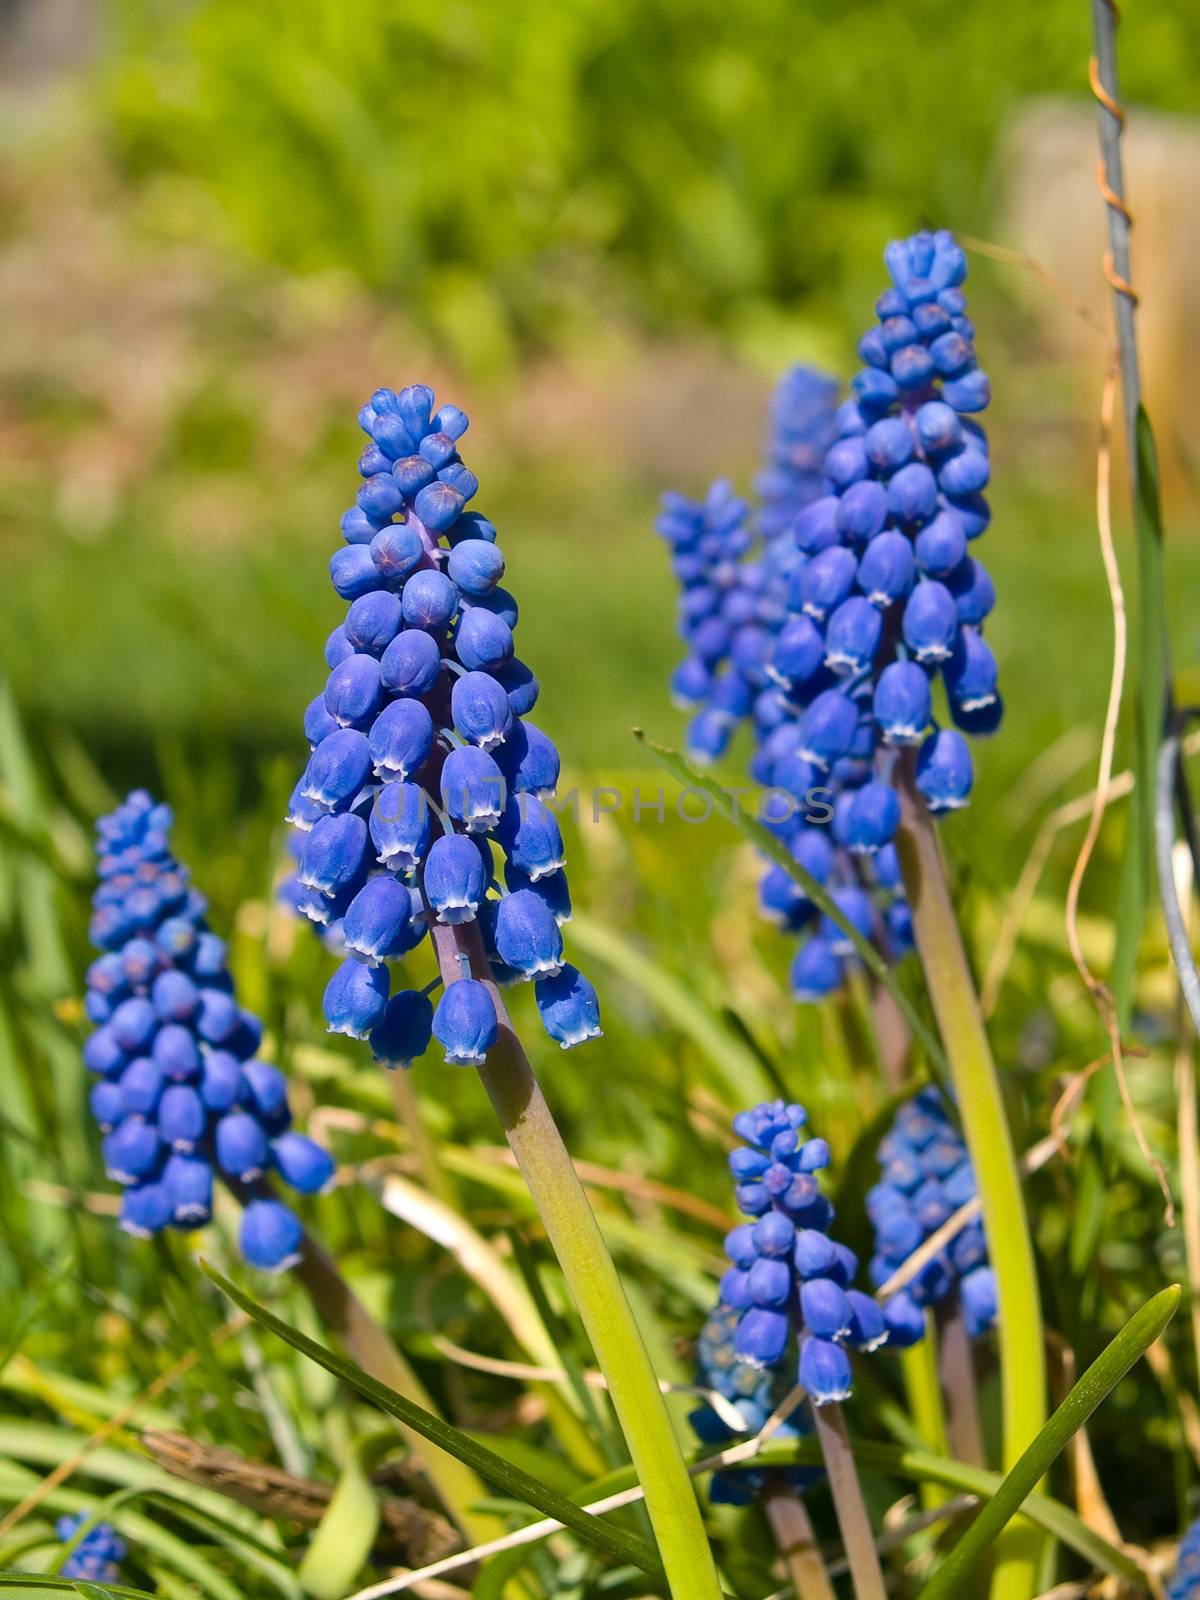 Tiny Cluster Flowers Grape Hyacinths in a Garden